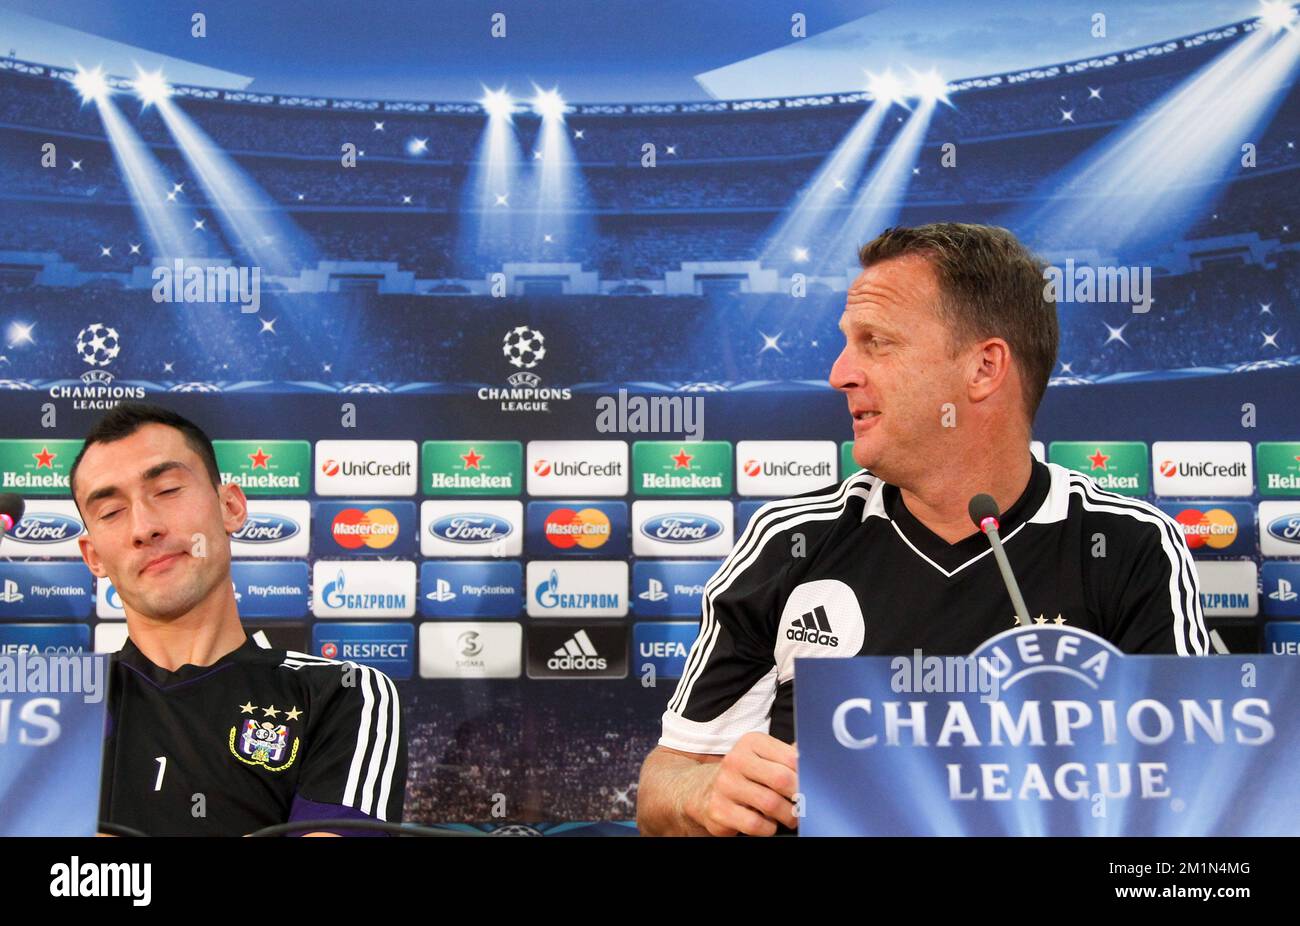 Anderlecht hit five to move in on play-offs, UEFA Champions League